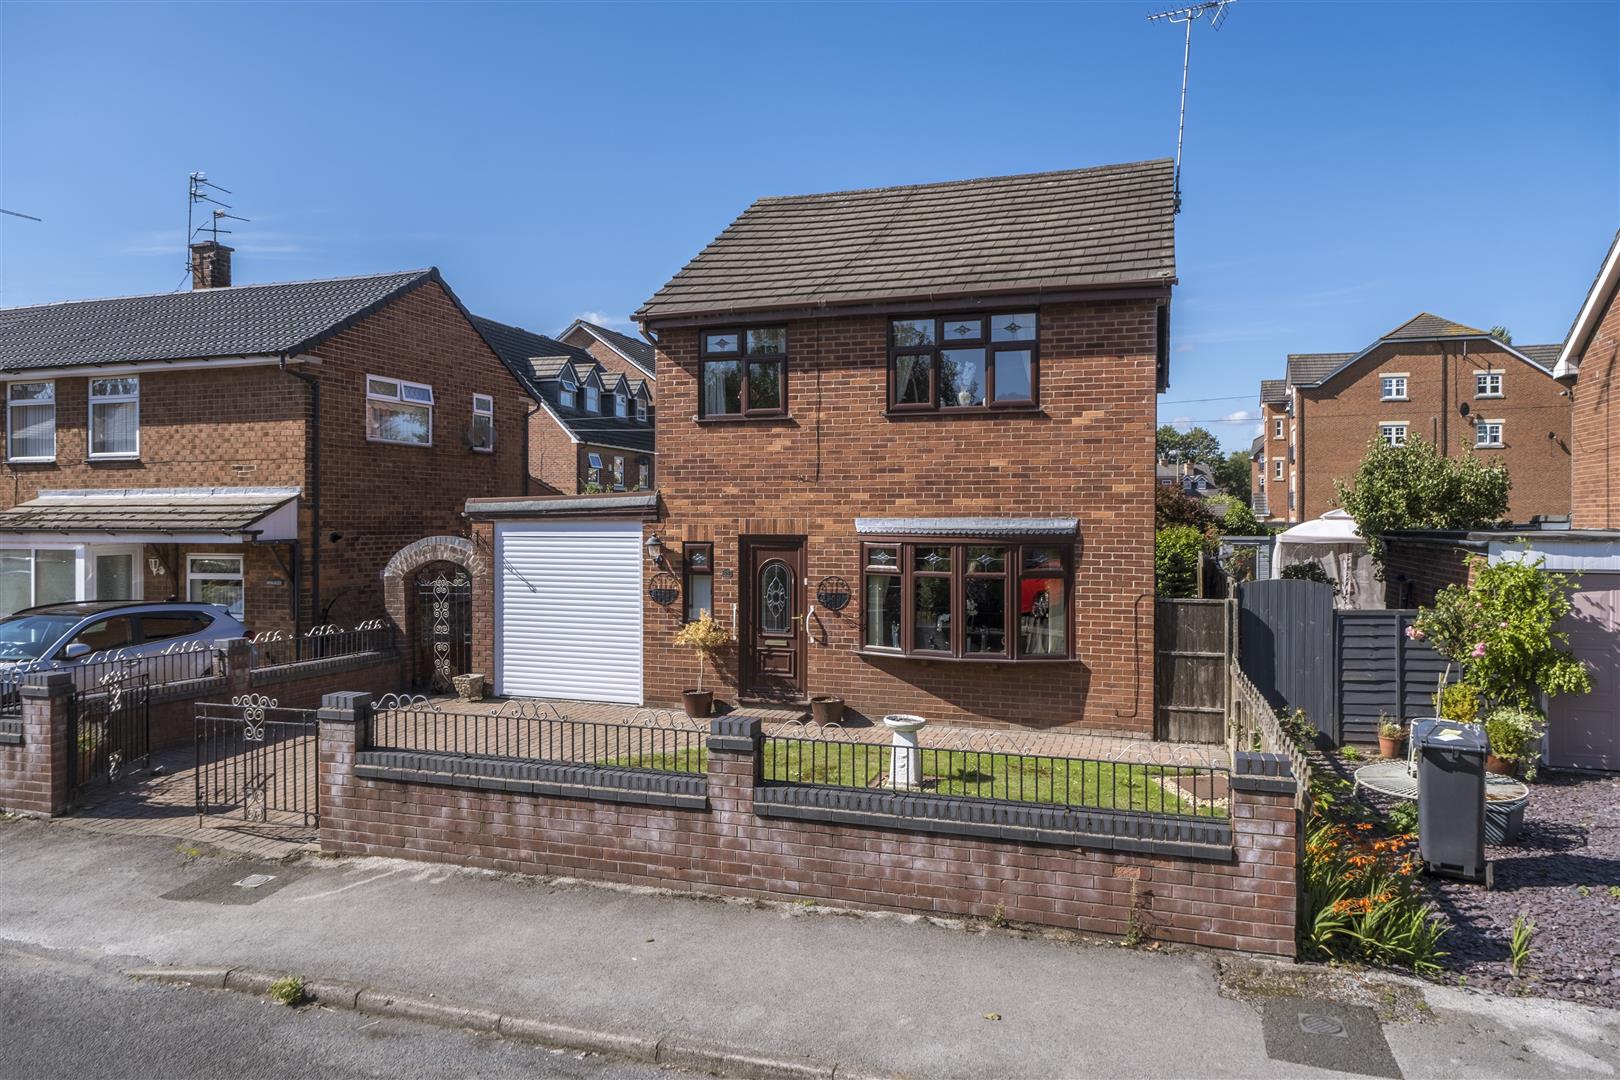 3 bedroom  Detached House for Sale in Northwich